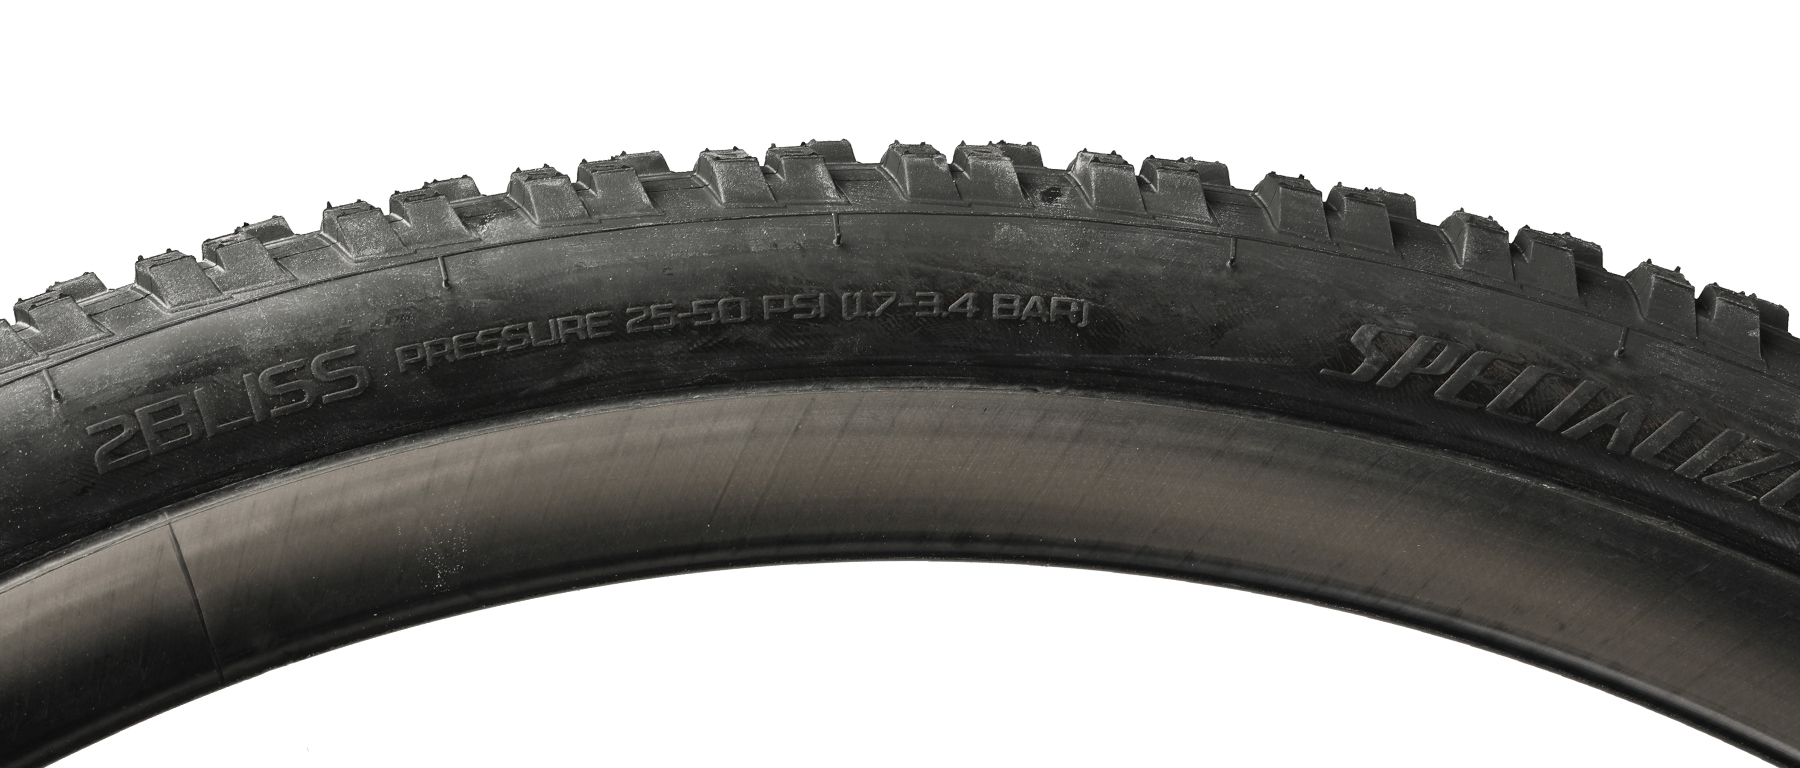 Specialized Ground Control CONTROL 2Bliss Ready Tire